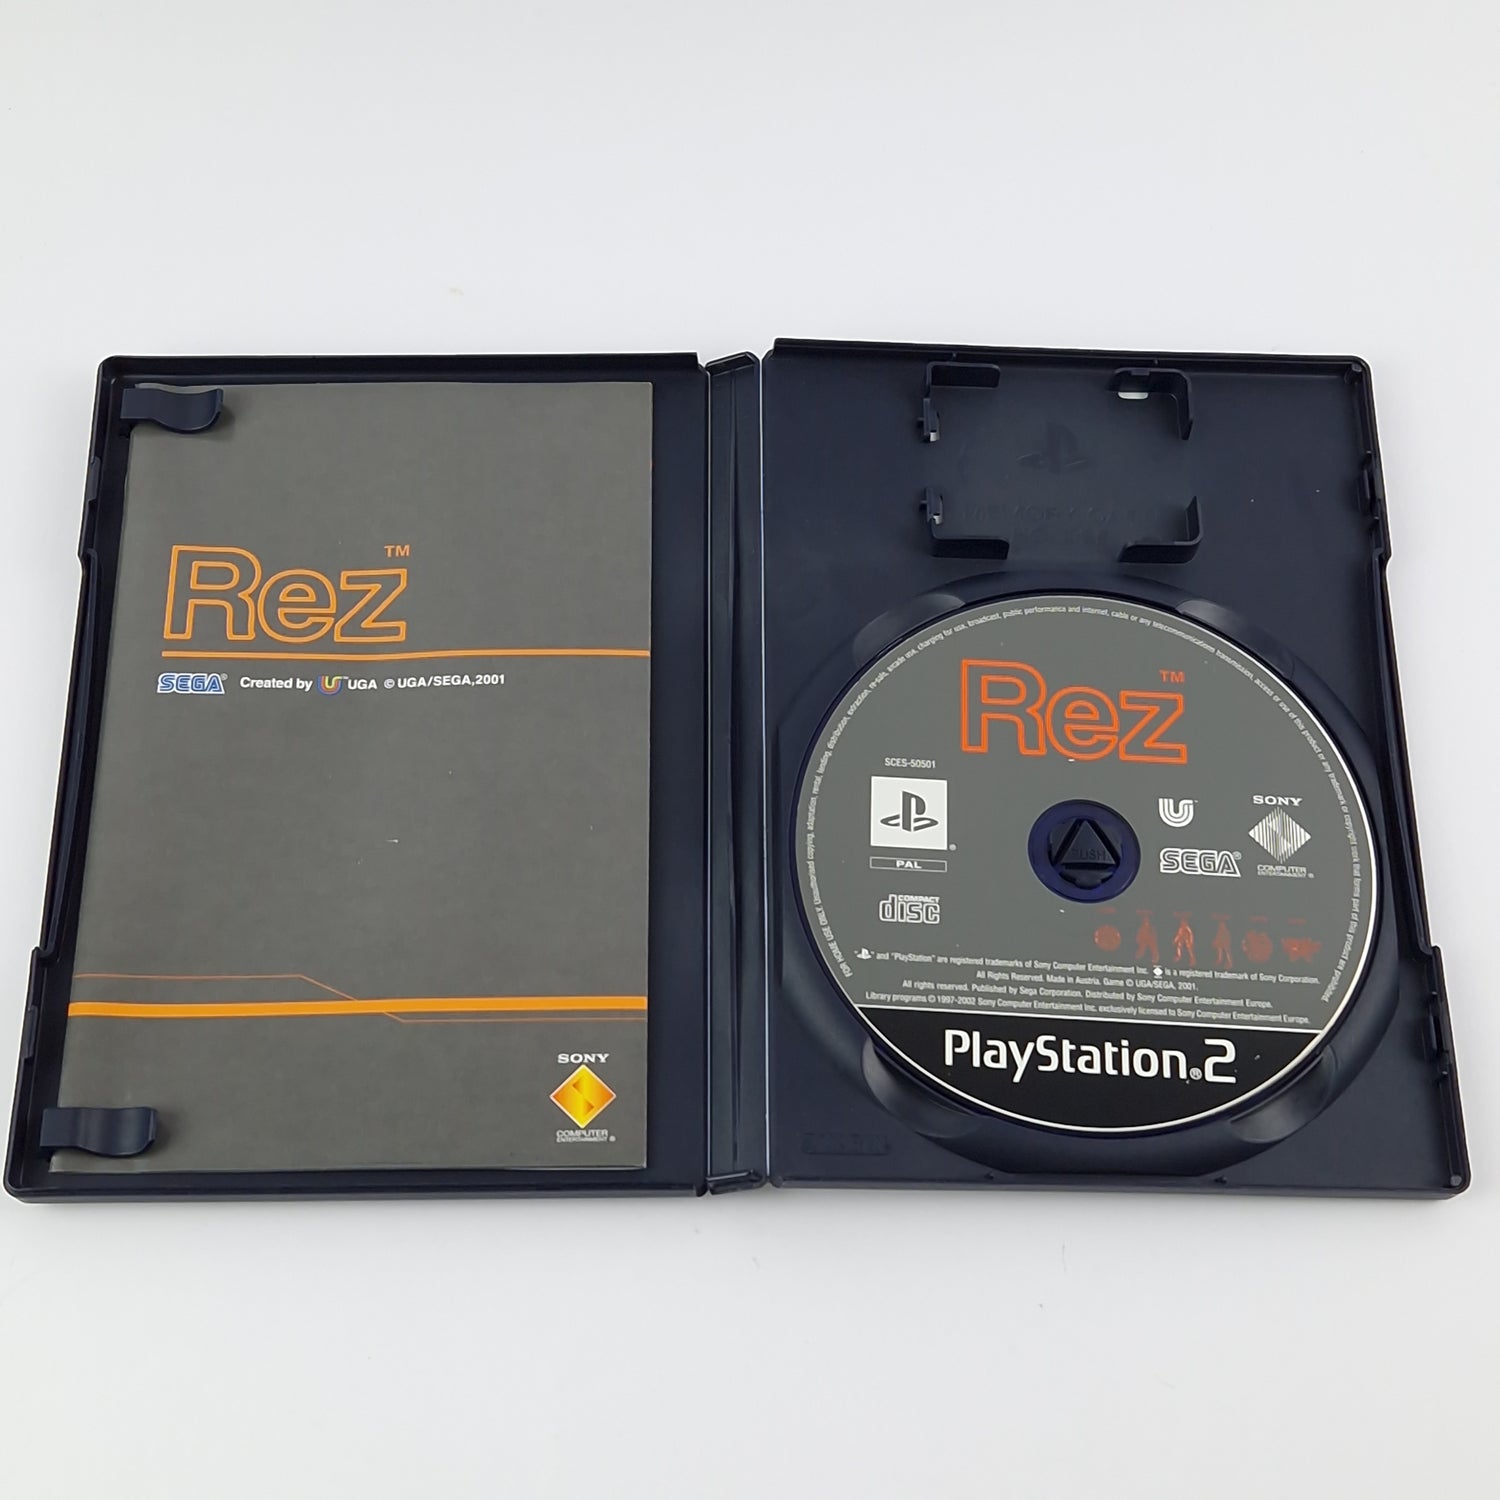 Sony Playstation 2 Game: REZ - OVP Instructions PAL PS2 Game